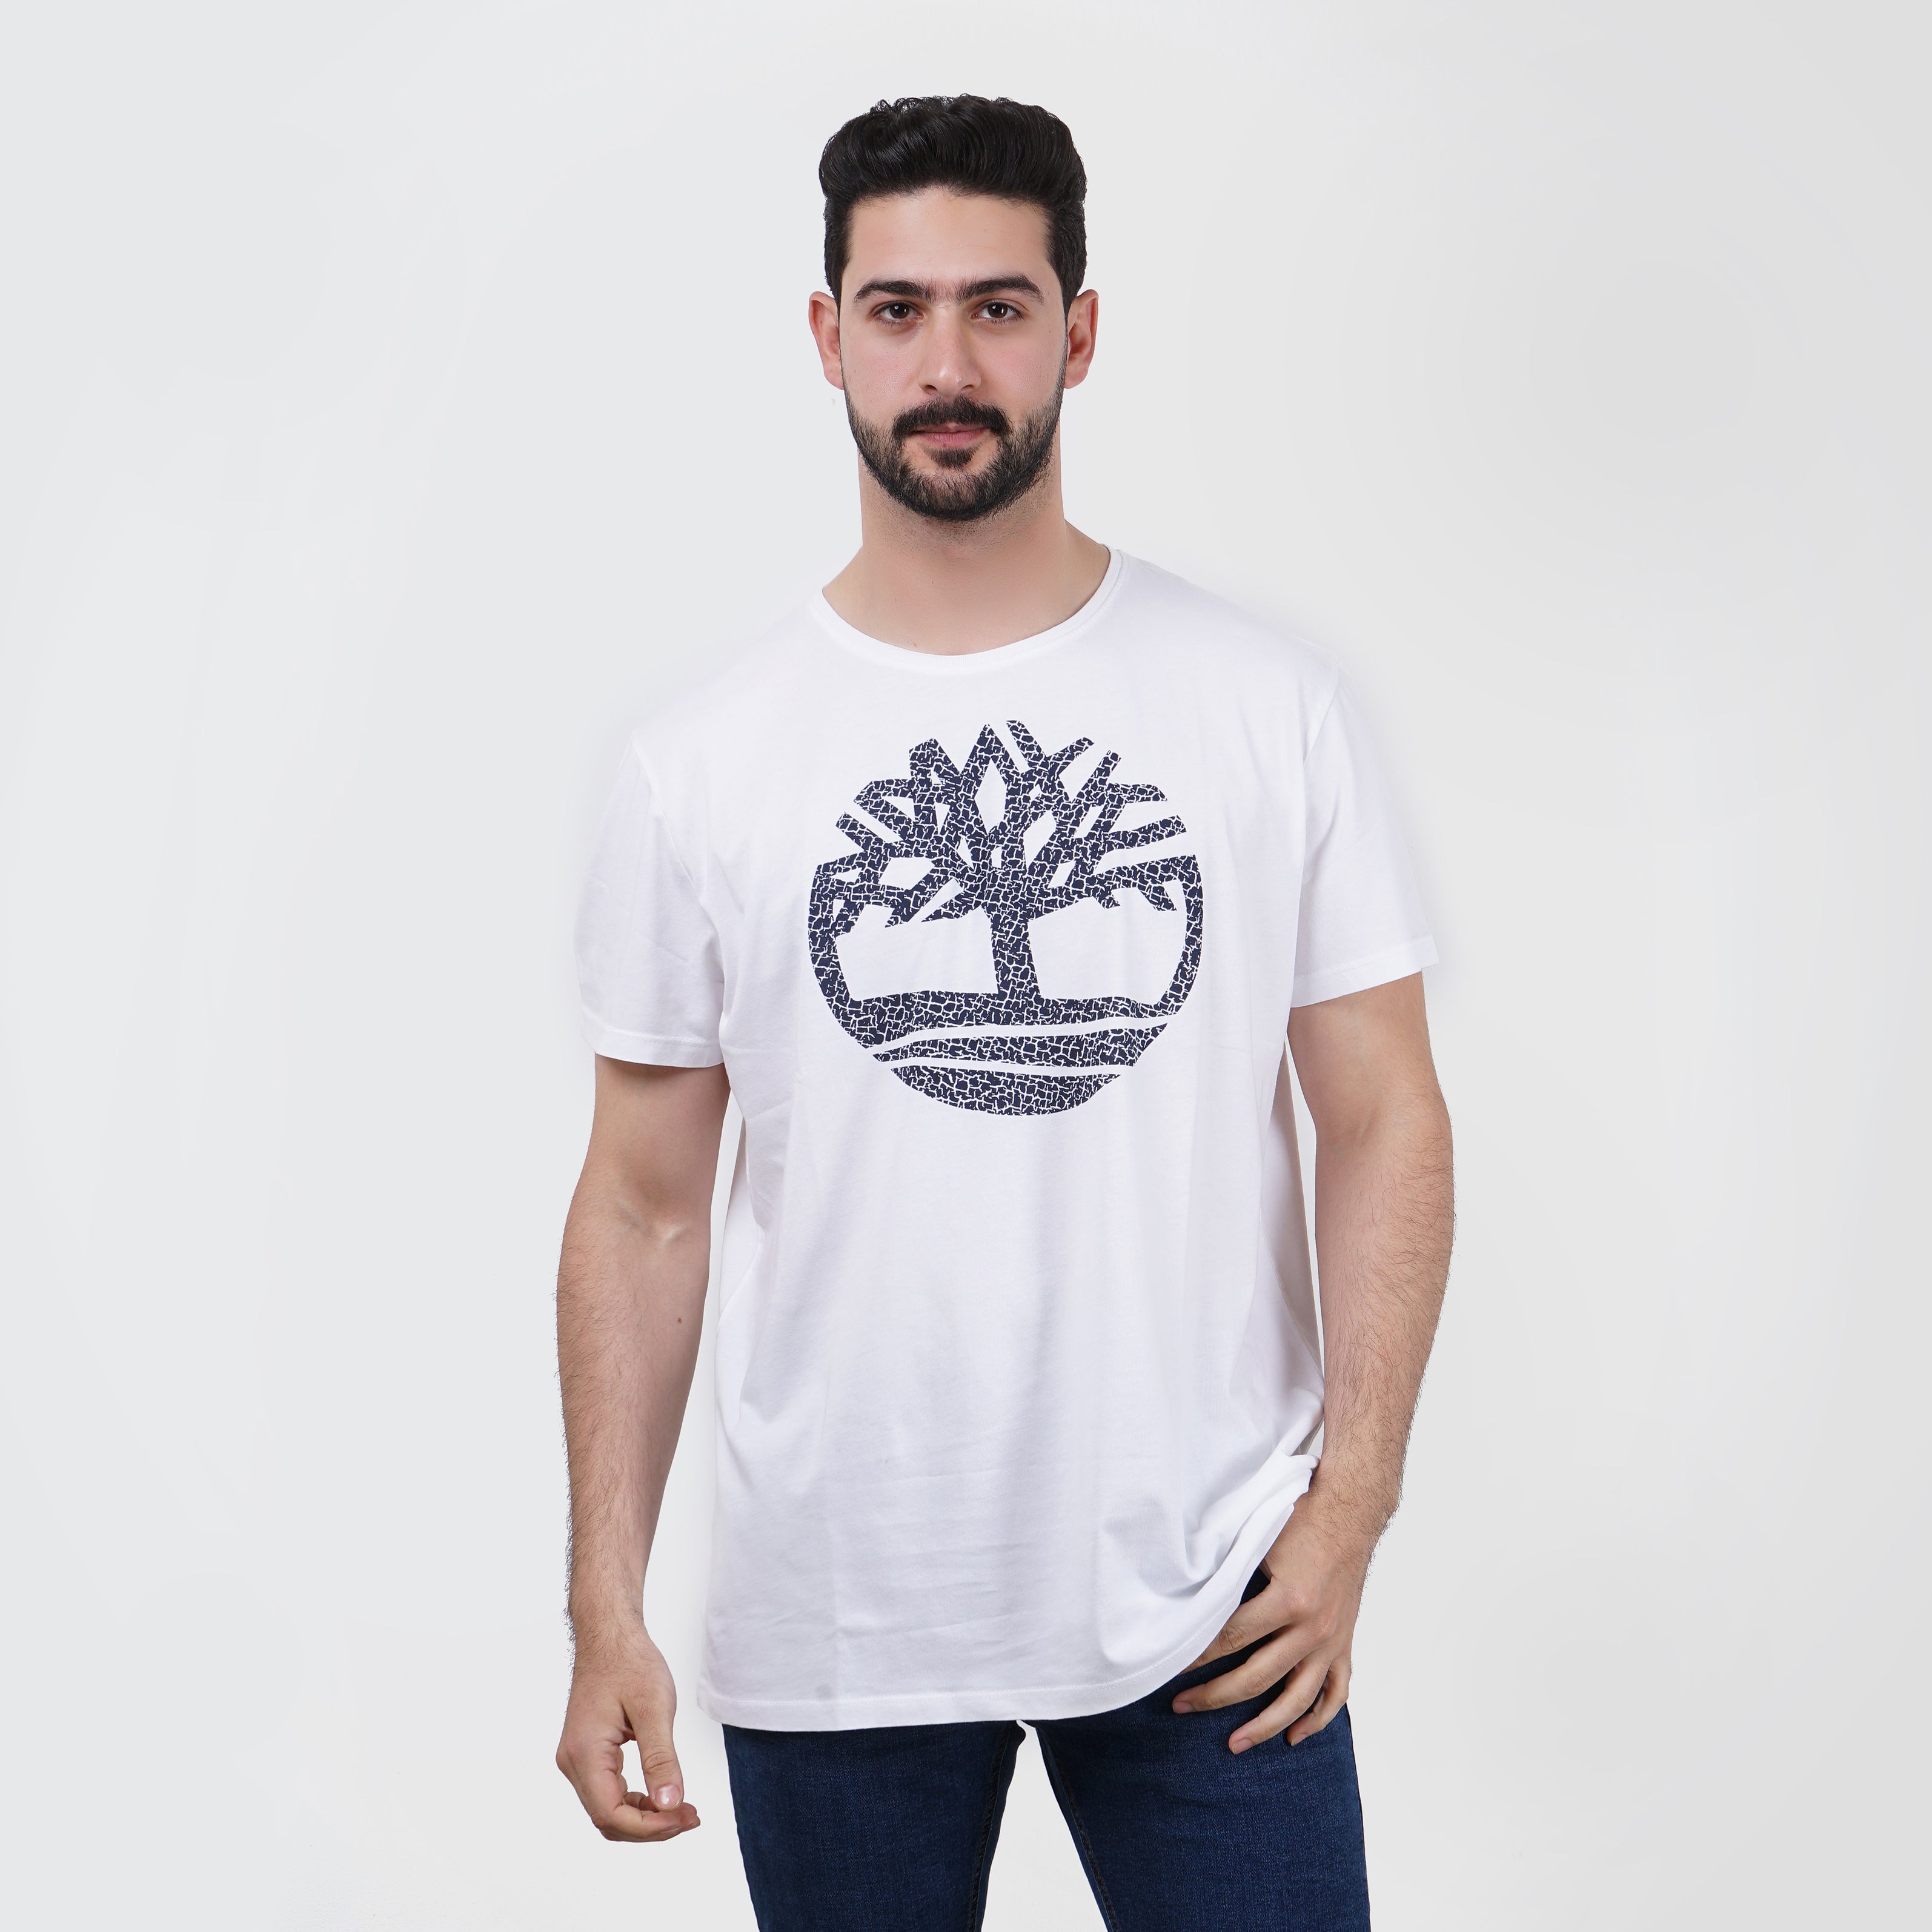 Man in white graphic t-shirt with Timberland logo design, casual style.